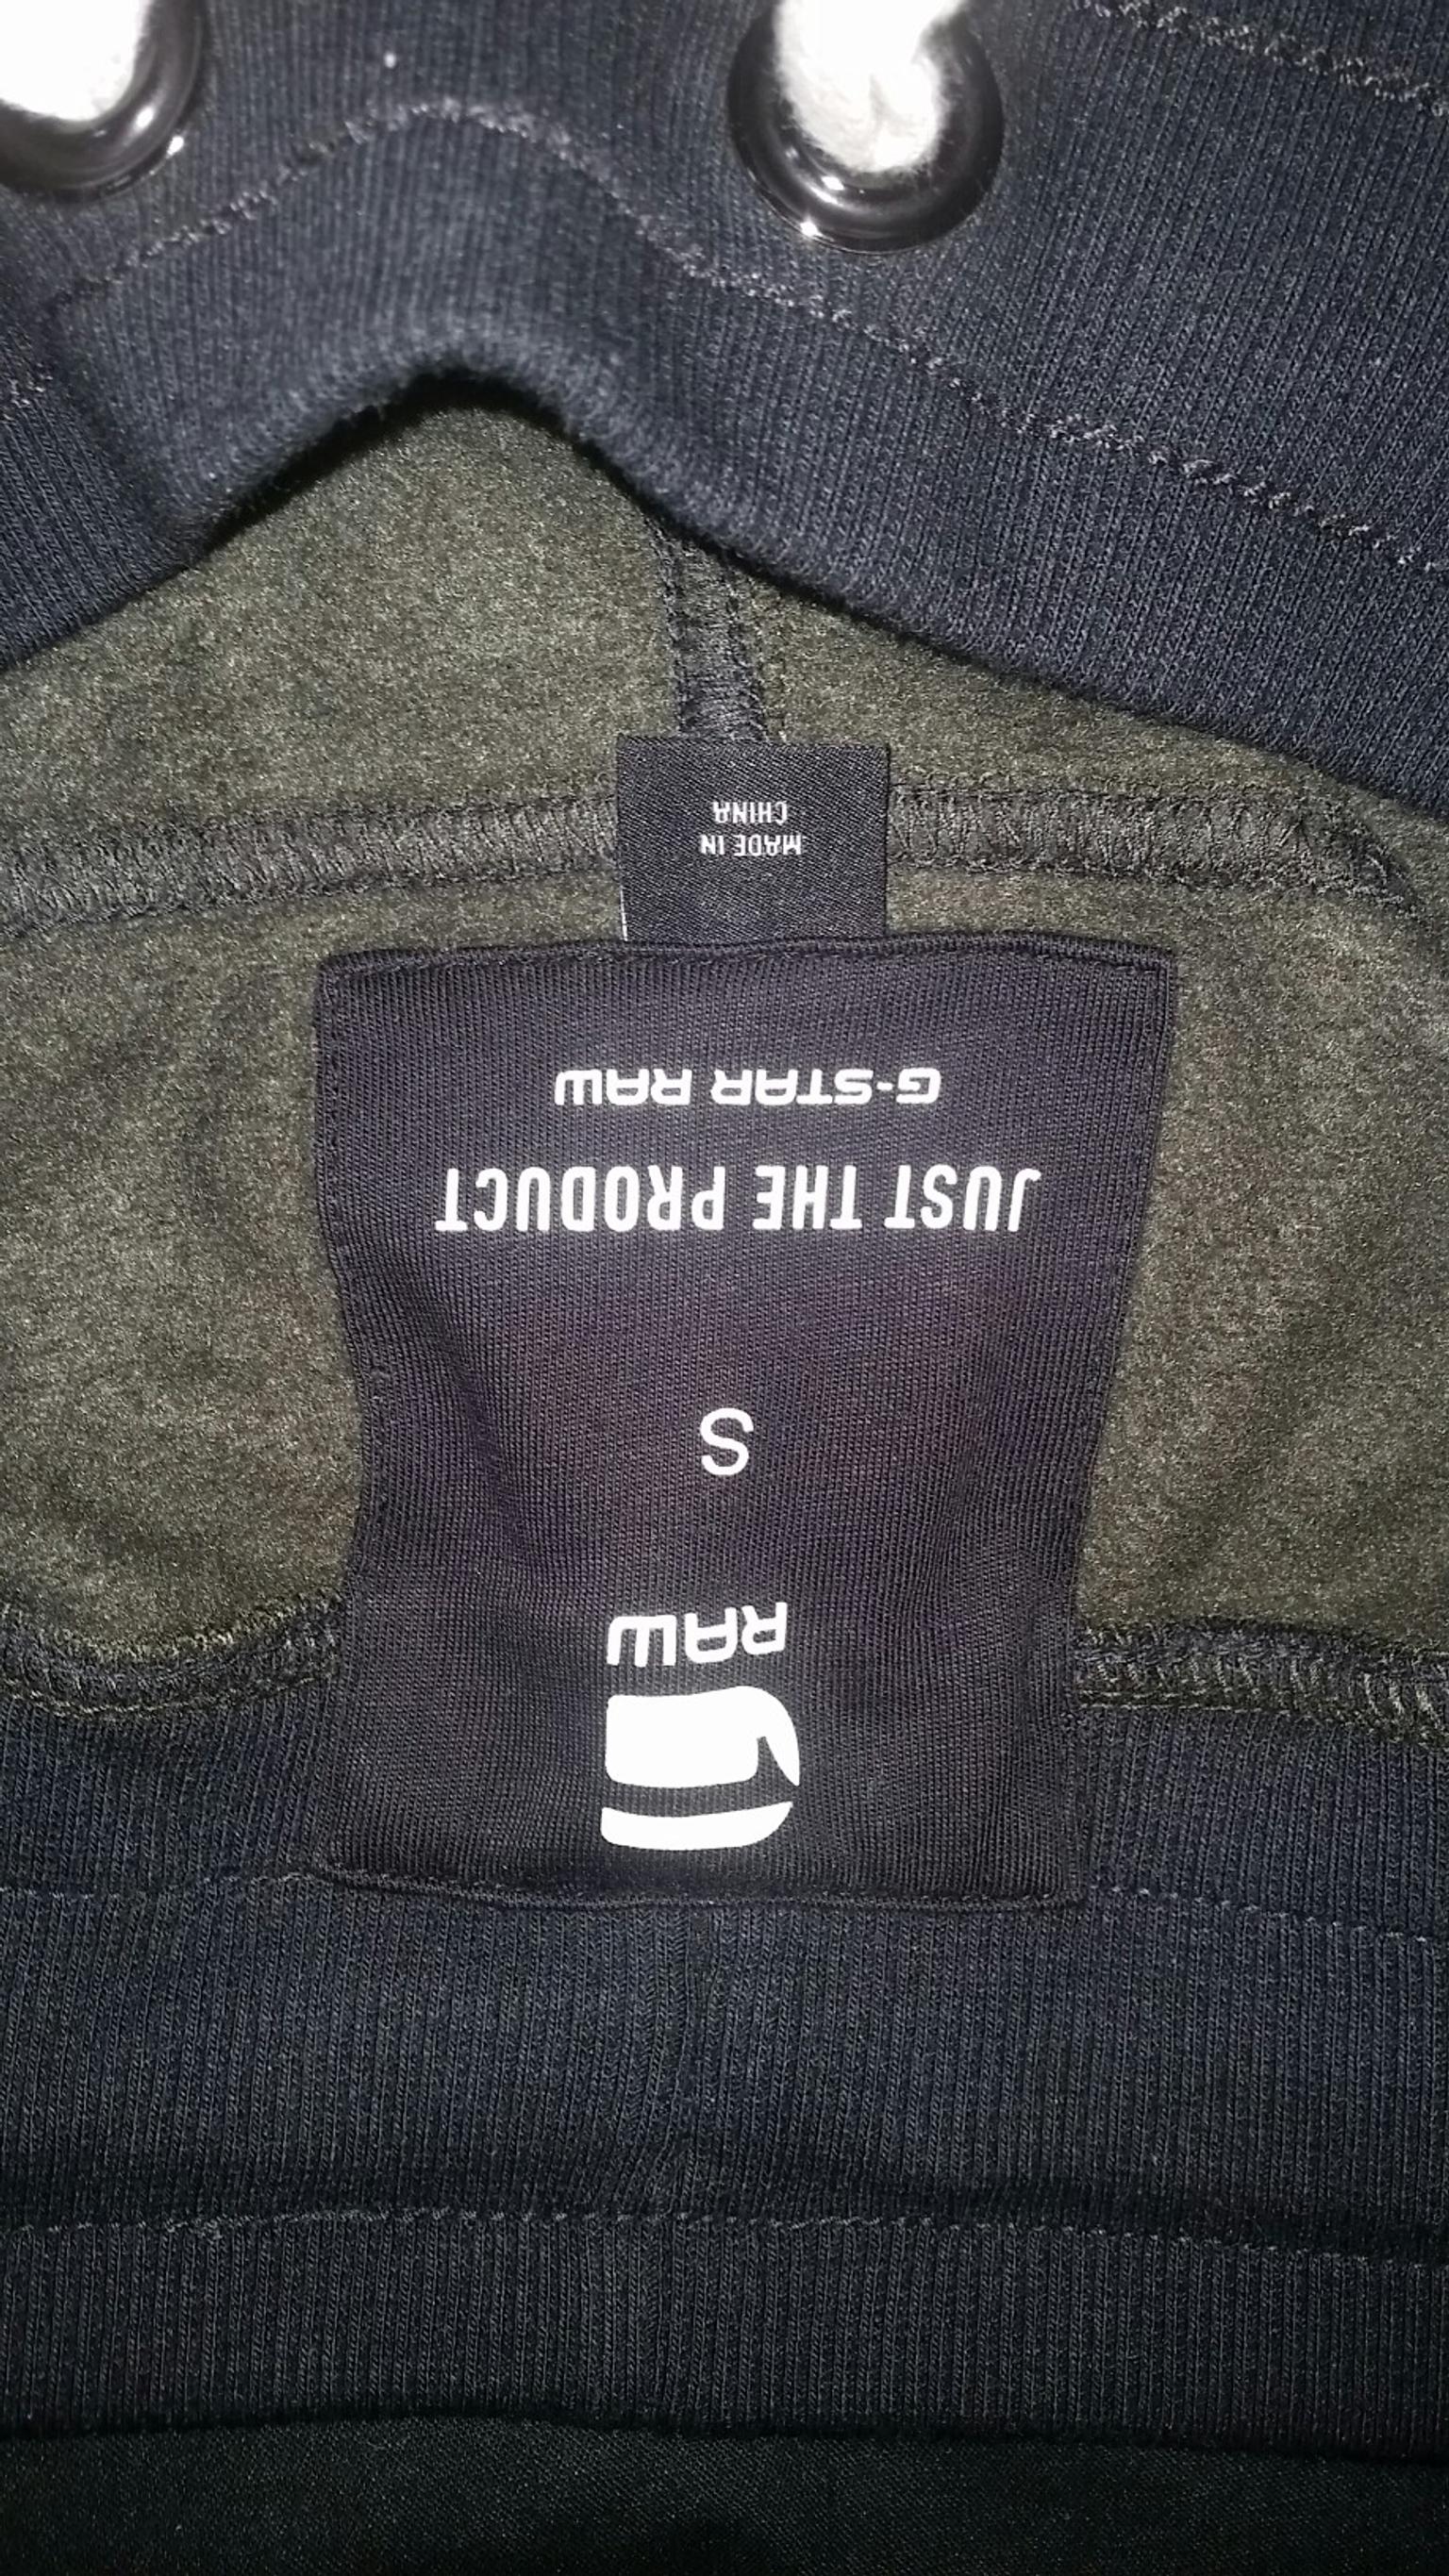 g star raw made in china